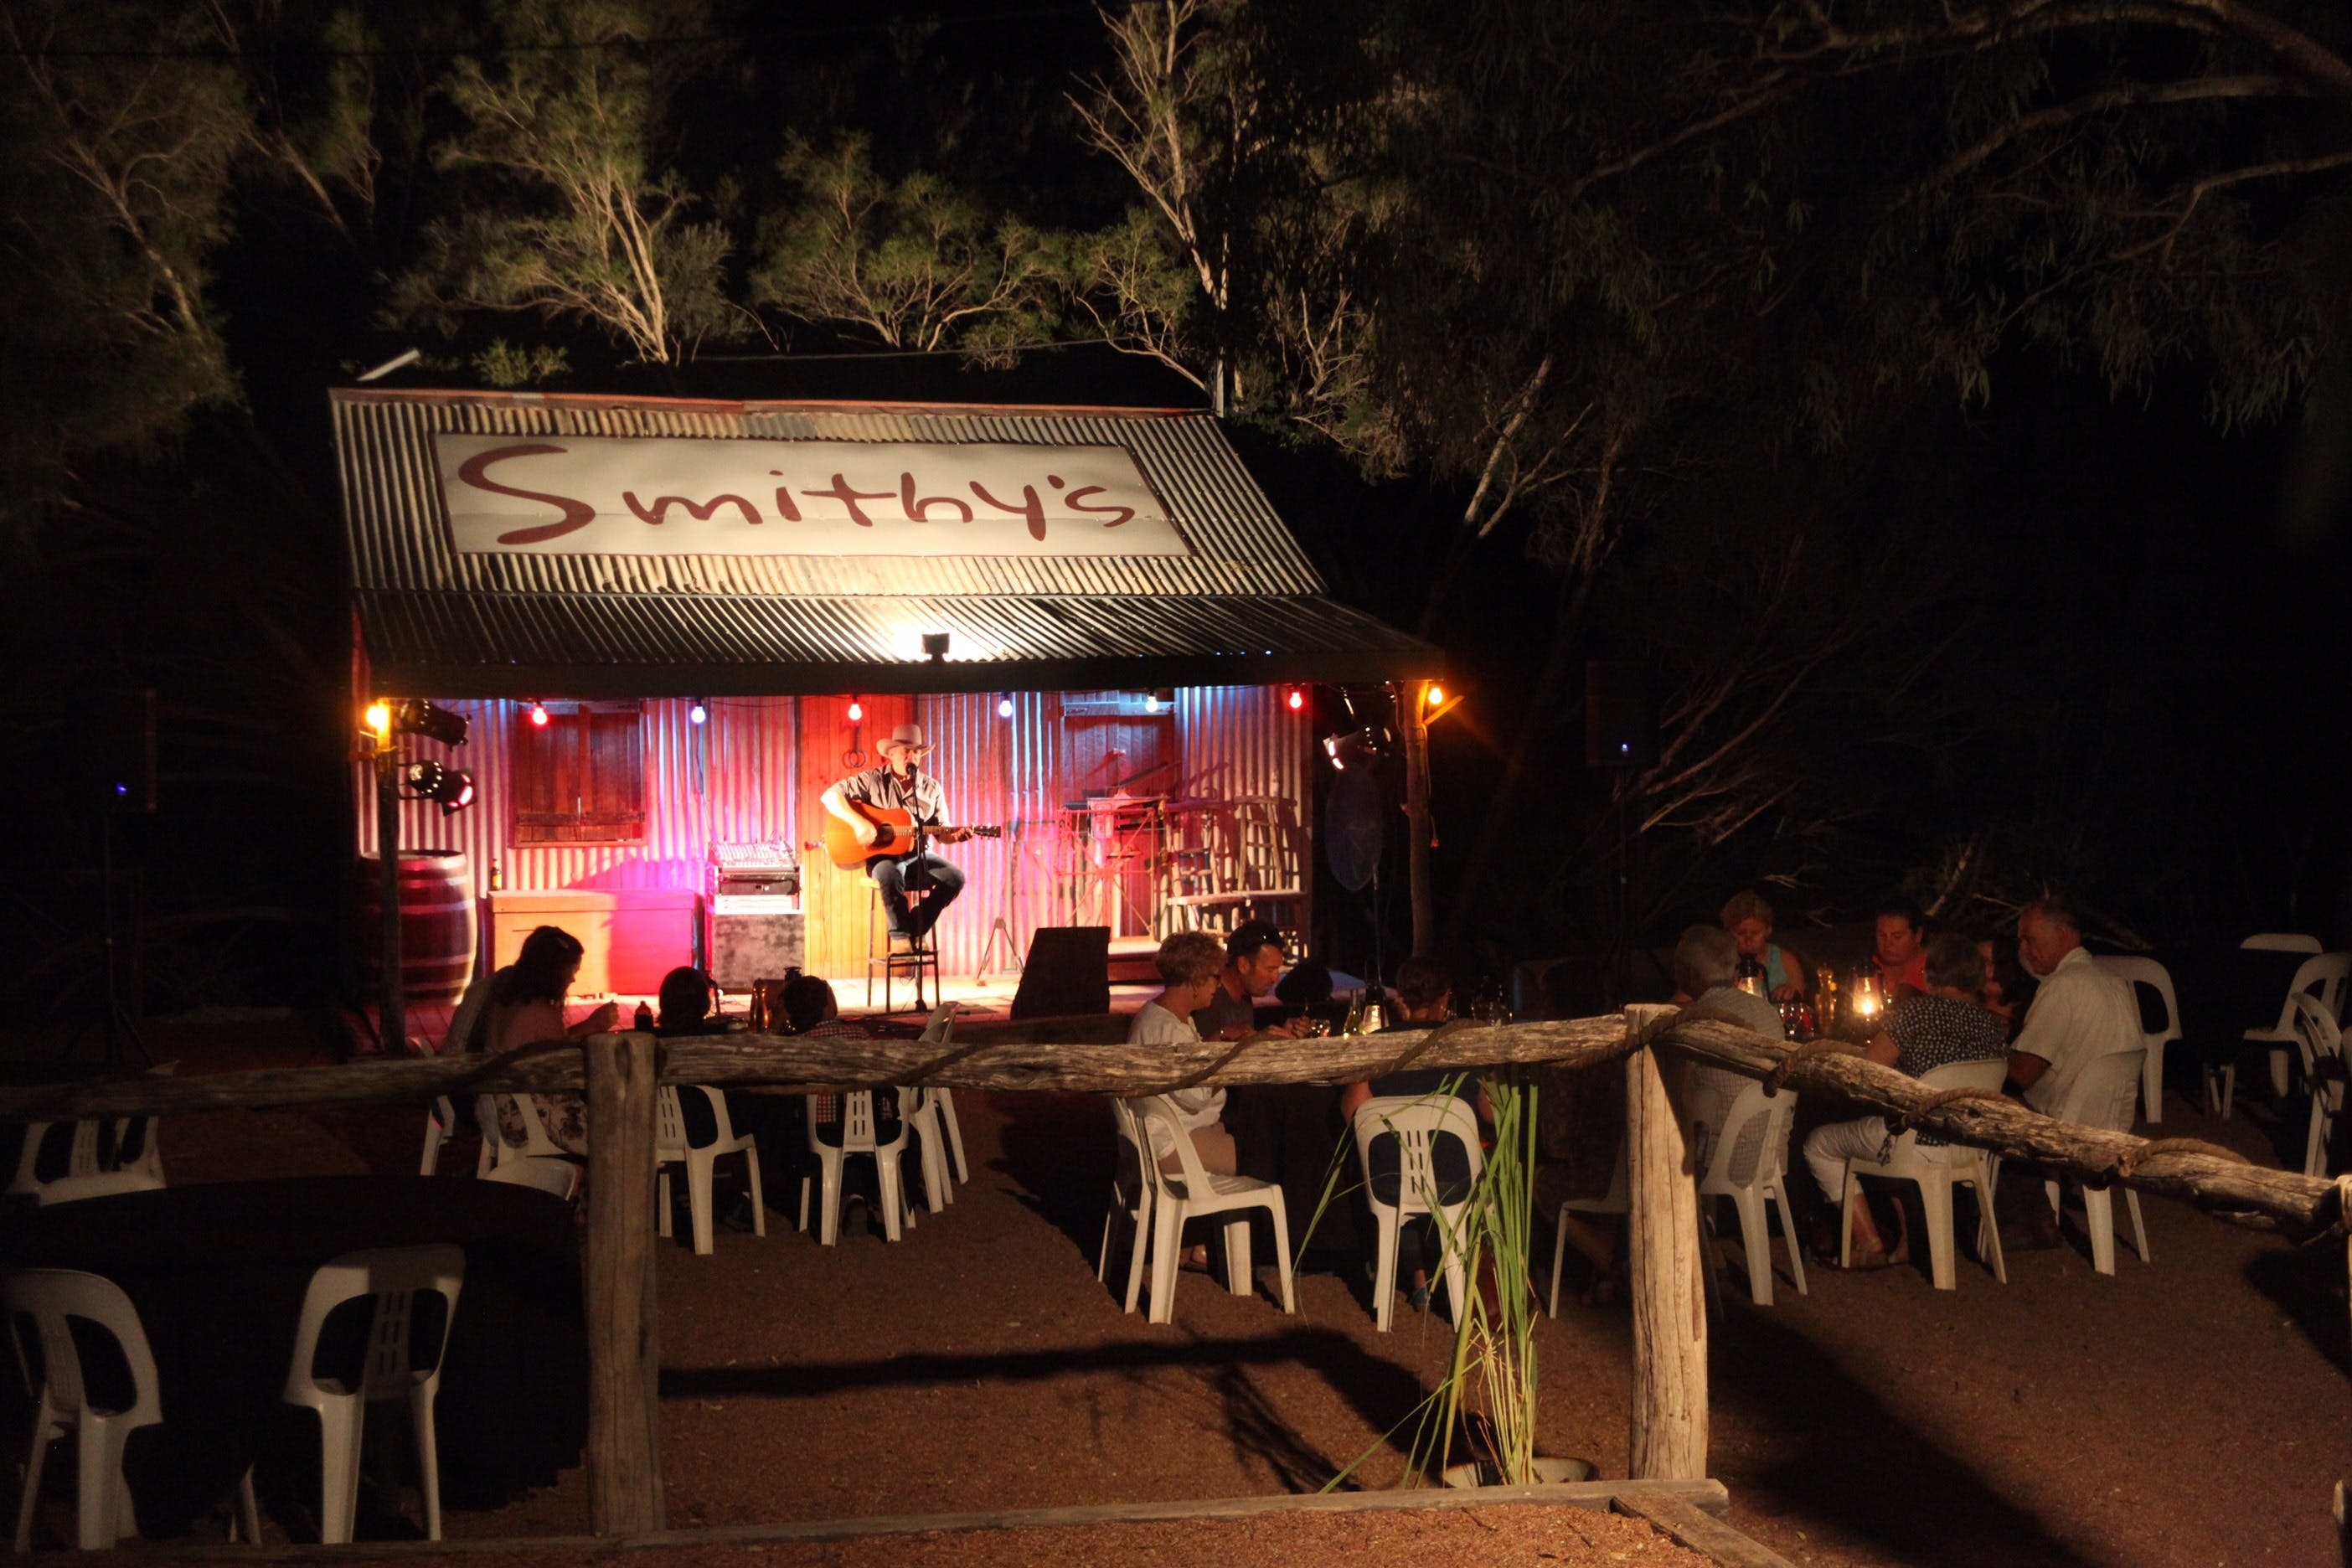 Smithy's Outback Dinner and Show - Accommodation Mermaid Beach